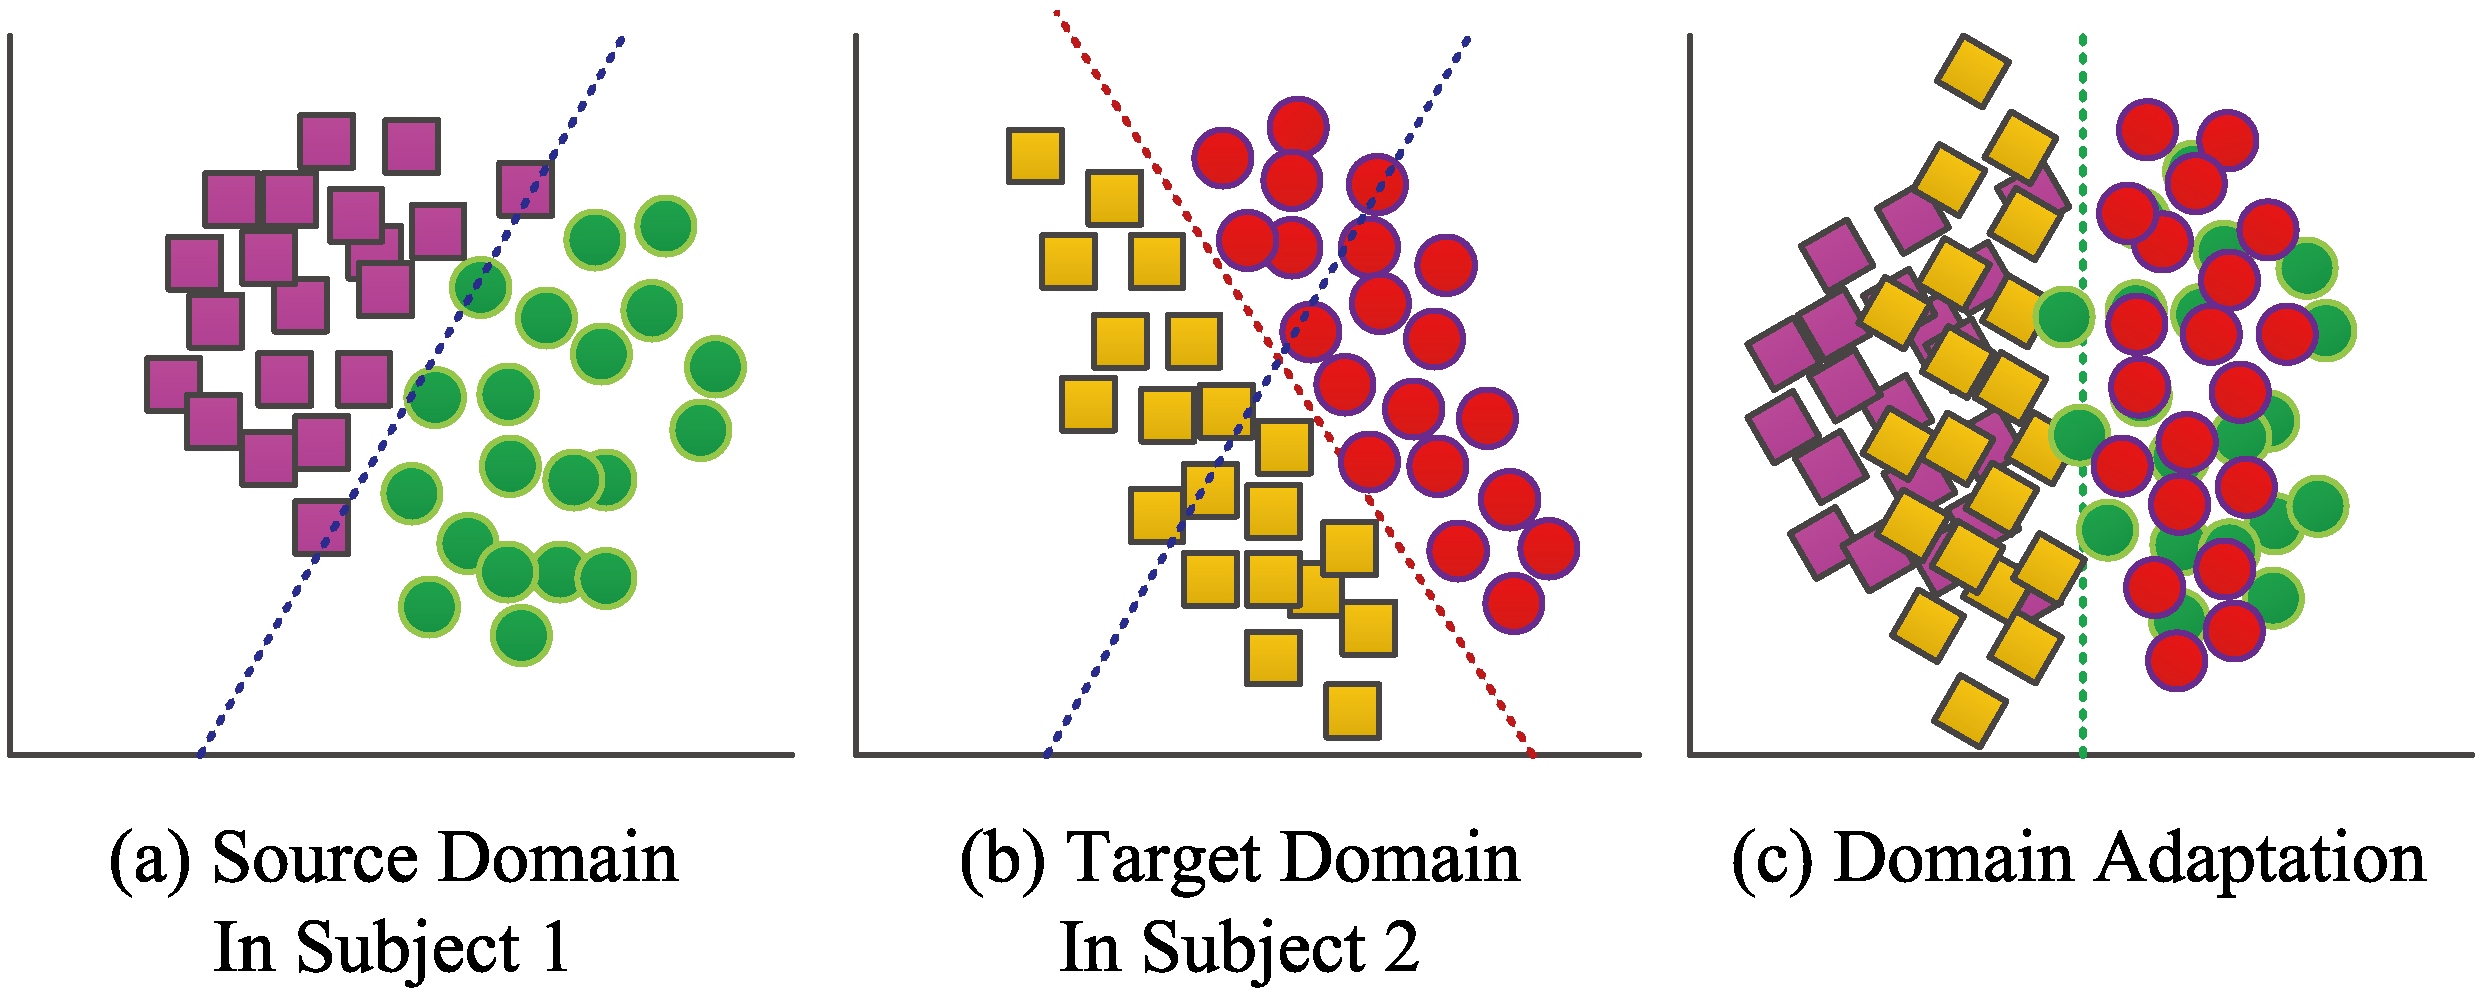 An example to demonstrate domain adaptation algorithm. (a) Shows data distribution from Subject 1. (b) Shows data distribution from Subject 2. (c) Shows the transformed data after domain adaptation. It can be seen that the intention of domain adaptation is reducing the discrepancy in distribution and making classifiers is robust to both Subjects 1 and 2.